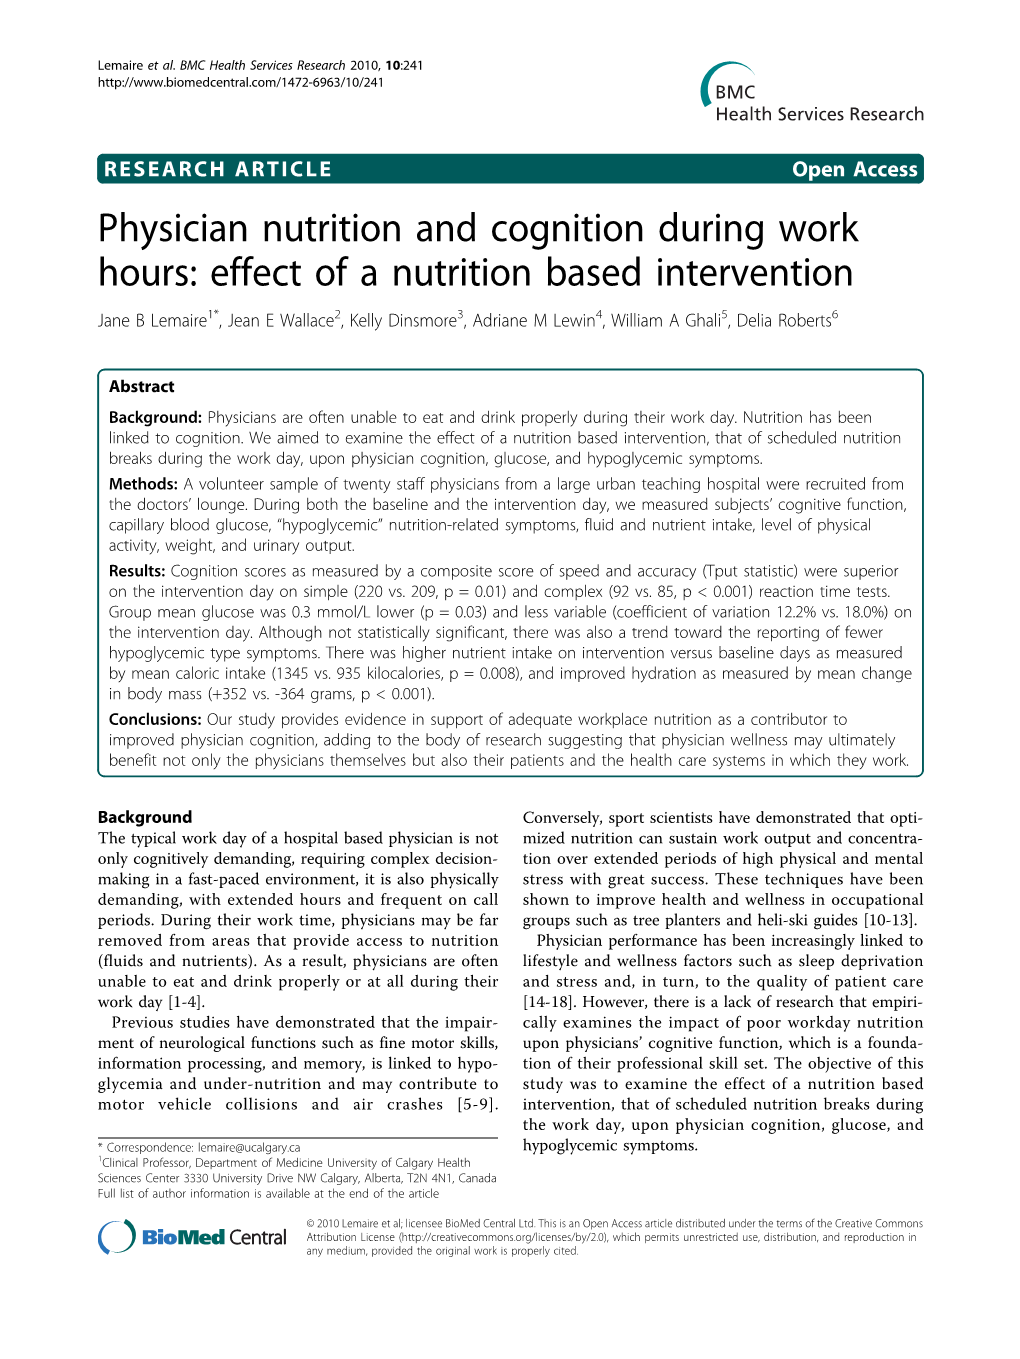 Physician Nutrition and Cognition During Work Hours: Effect of A